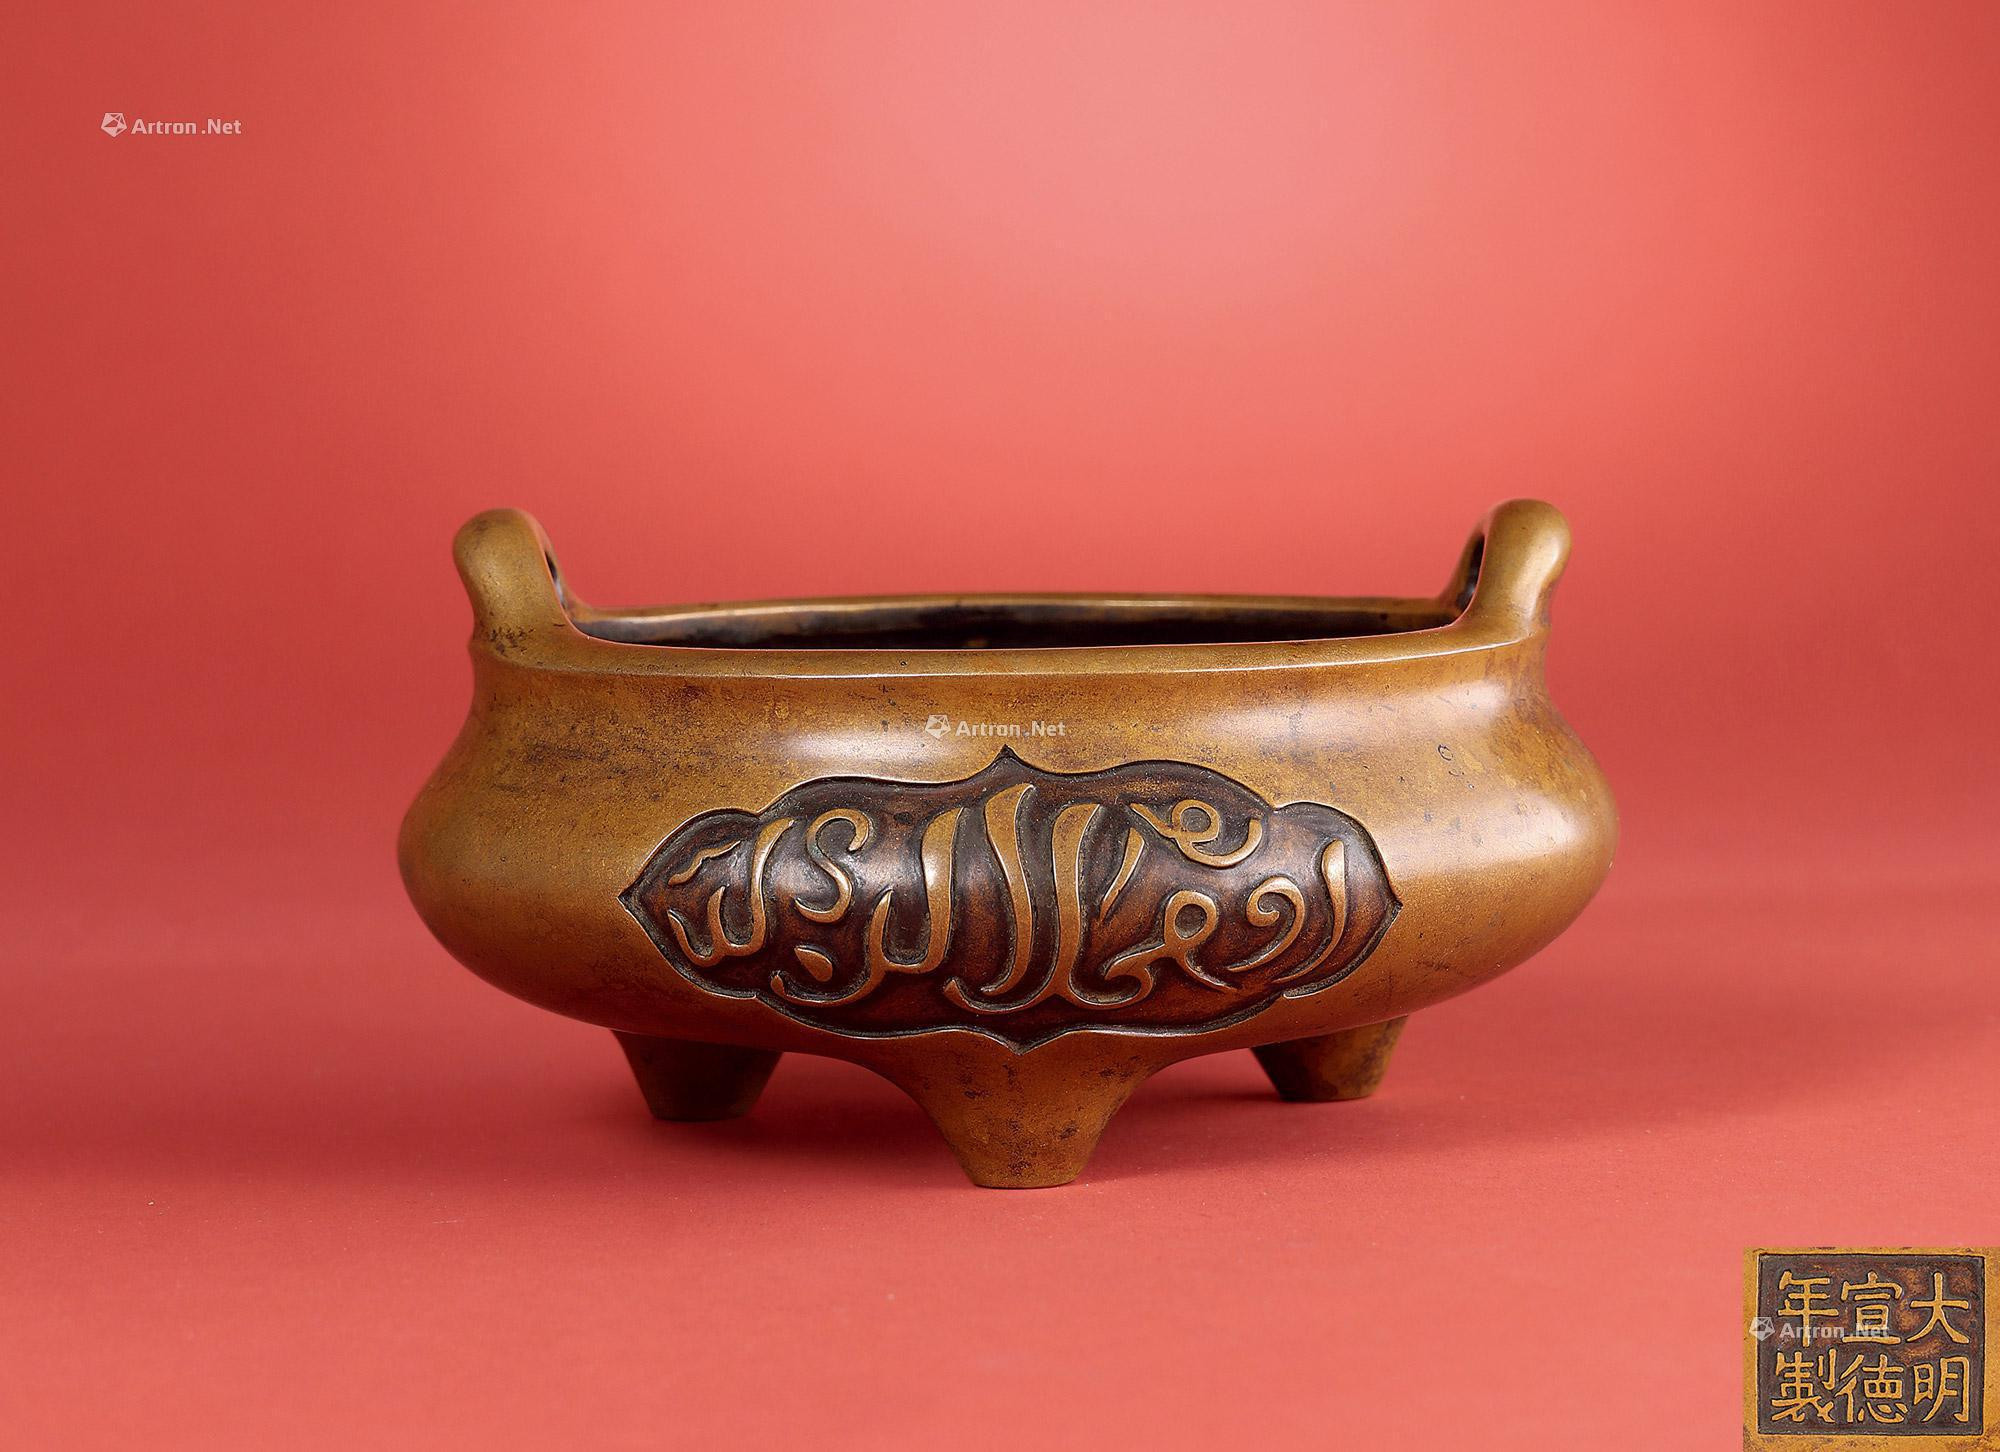 A BRONZE INCENSE BURNER WITH ARABIC CALLIGRAPHIES